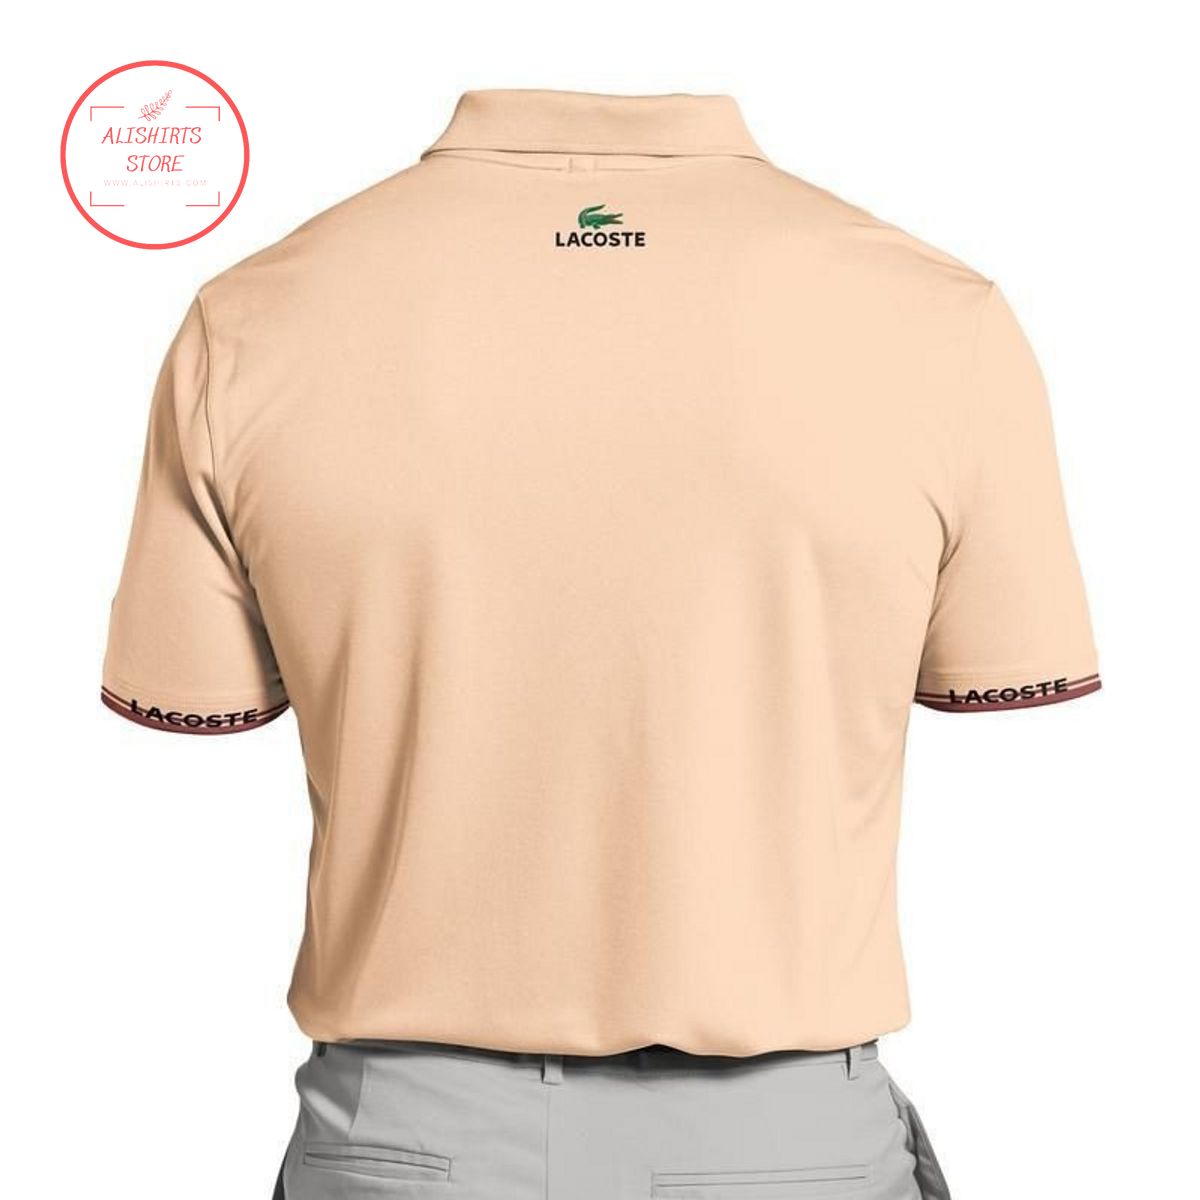 Lacoste Ricky Regal Polo Shirt